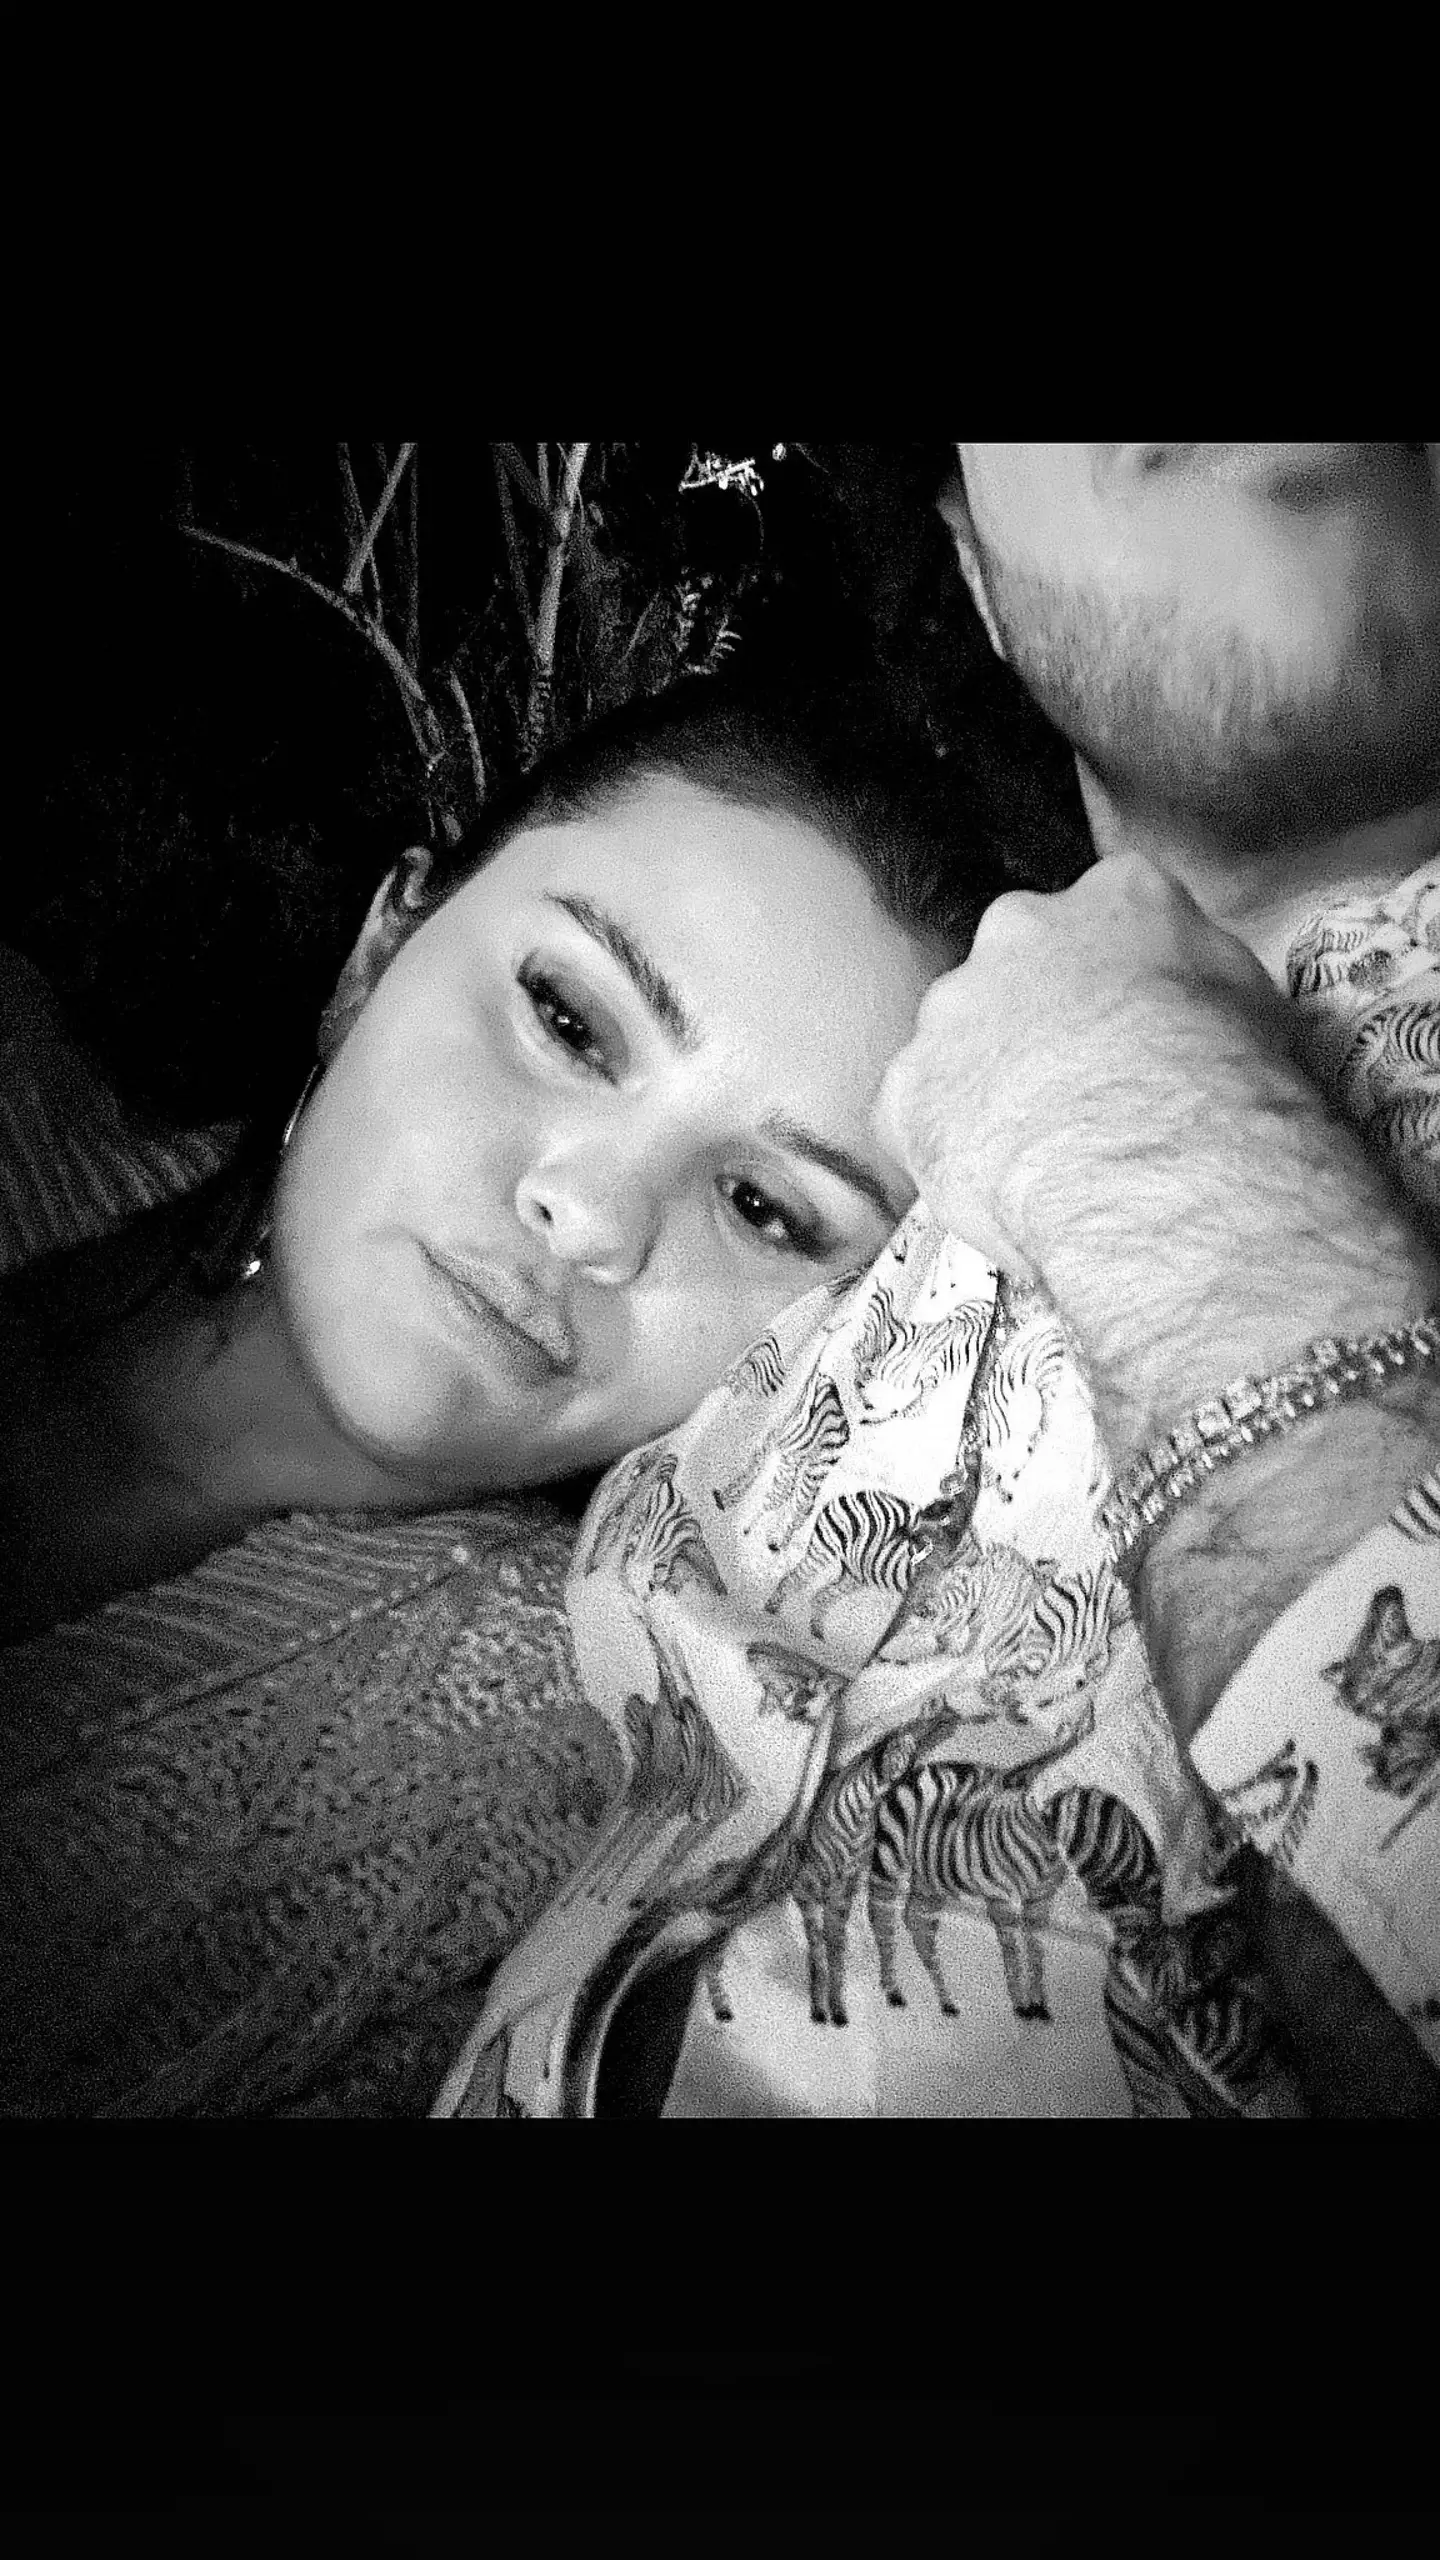 Selena Gomez shared a snap of her with a man thought to be Benny Blanco.